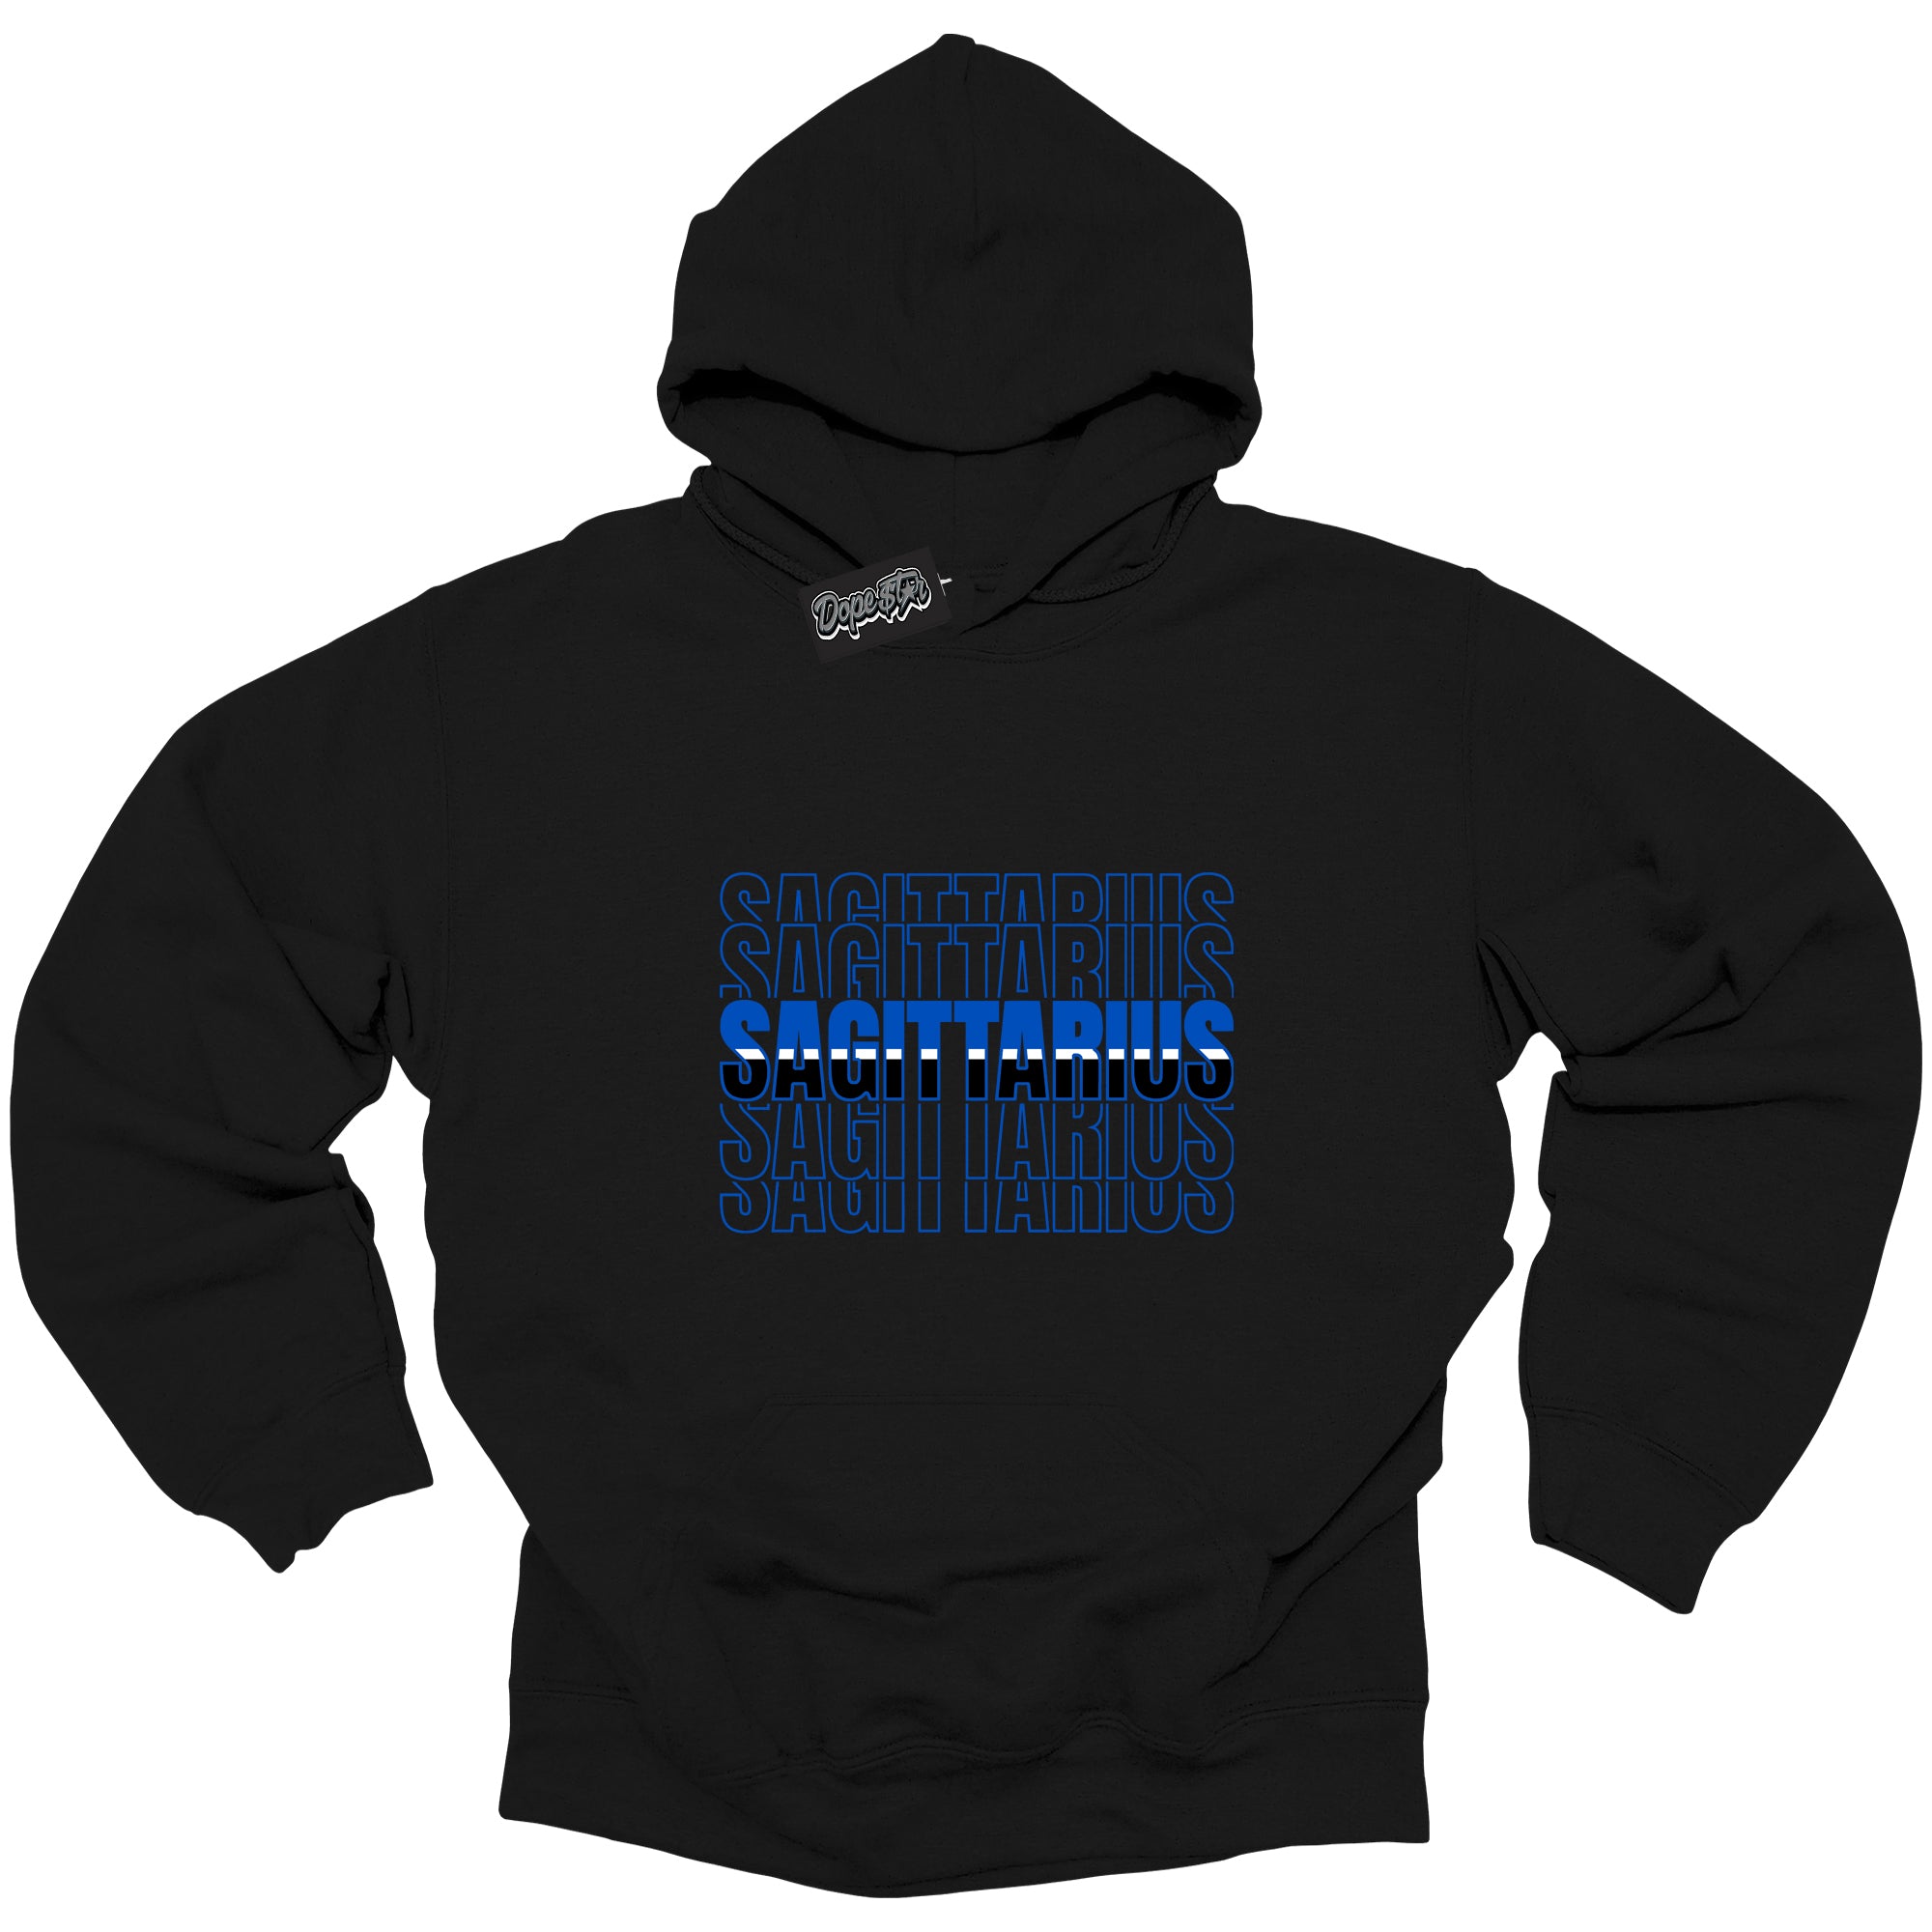 Cool Black Hoodie with “ Sagittarius ”  design that Perfectly Matches  Royal Reimagined 1s Sneakers.